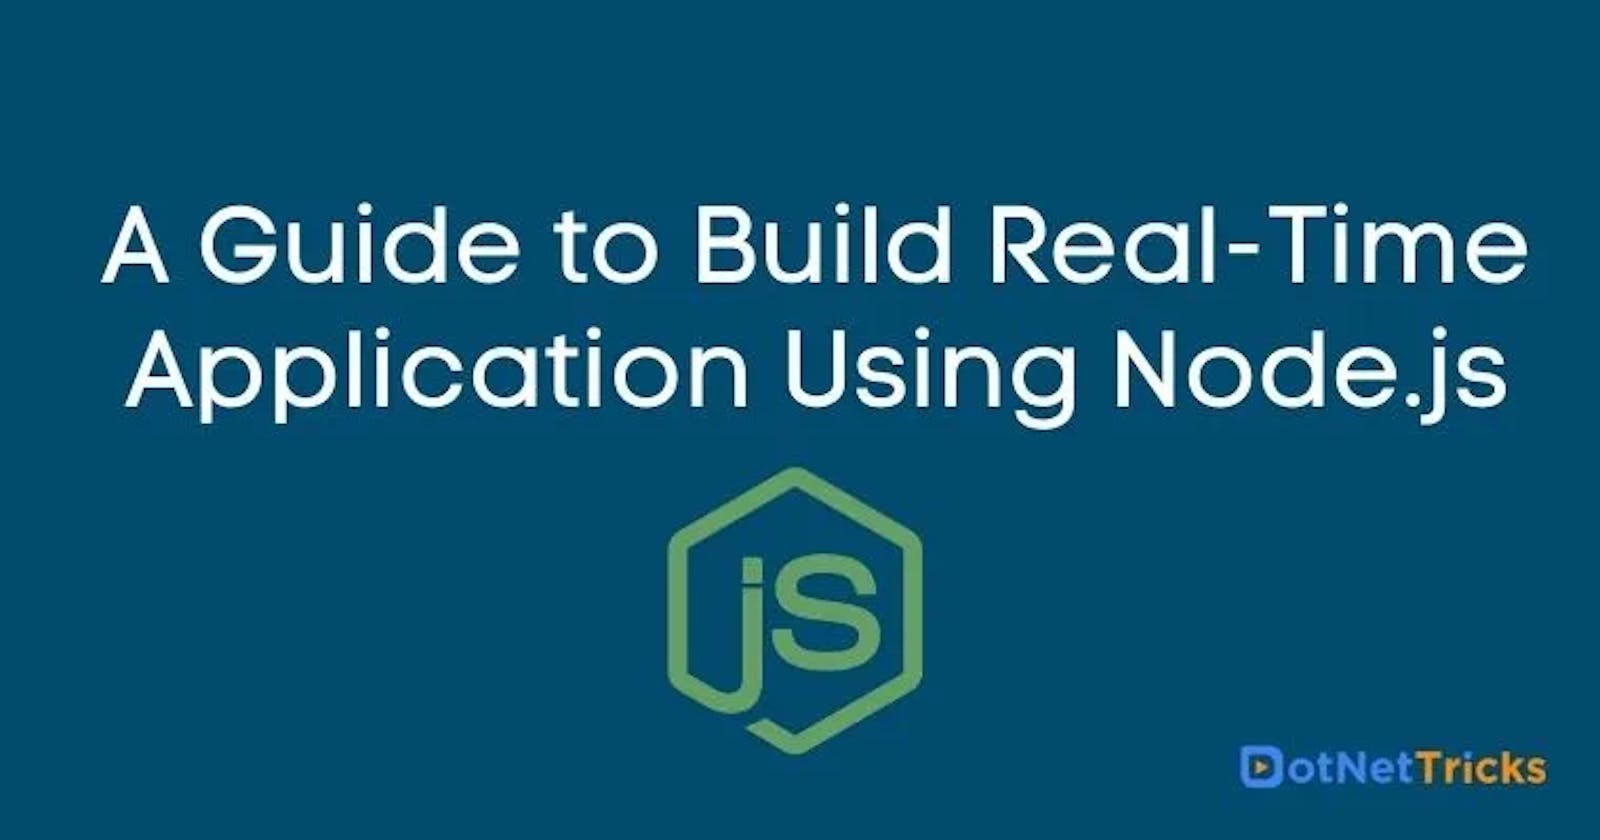 how to use Node.js to build a high-performance real-time chat application, complete with code snippets to help illustrate the concepts.